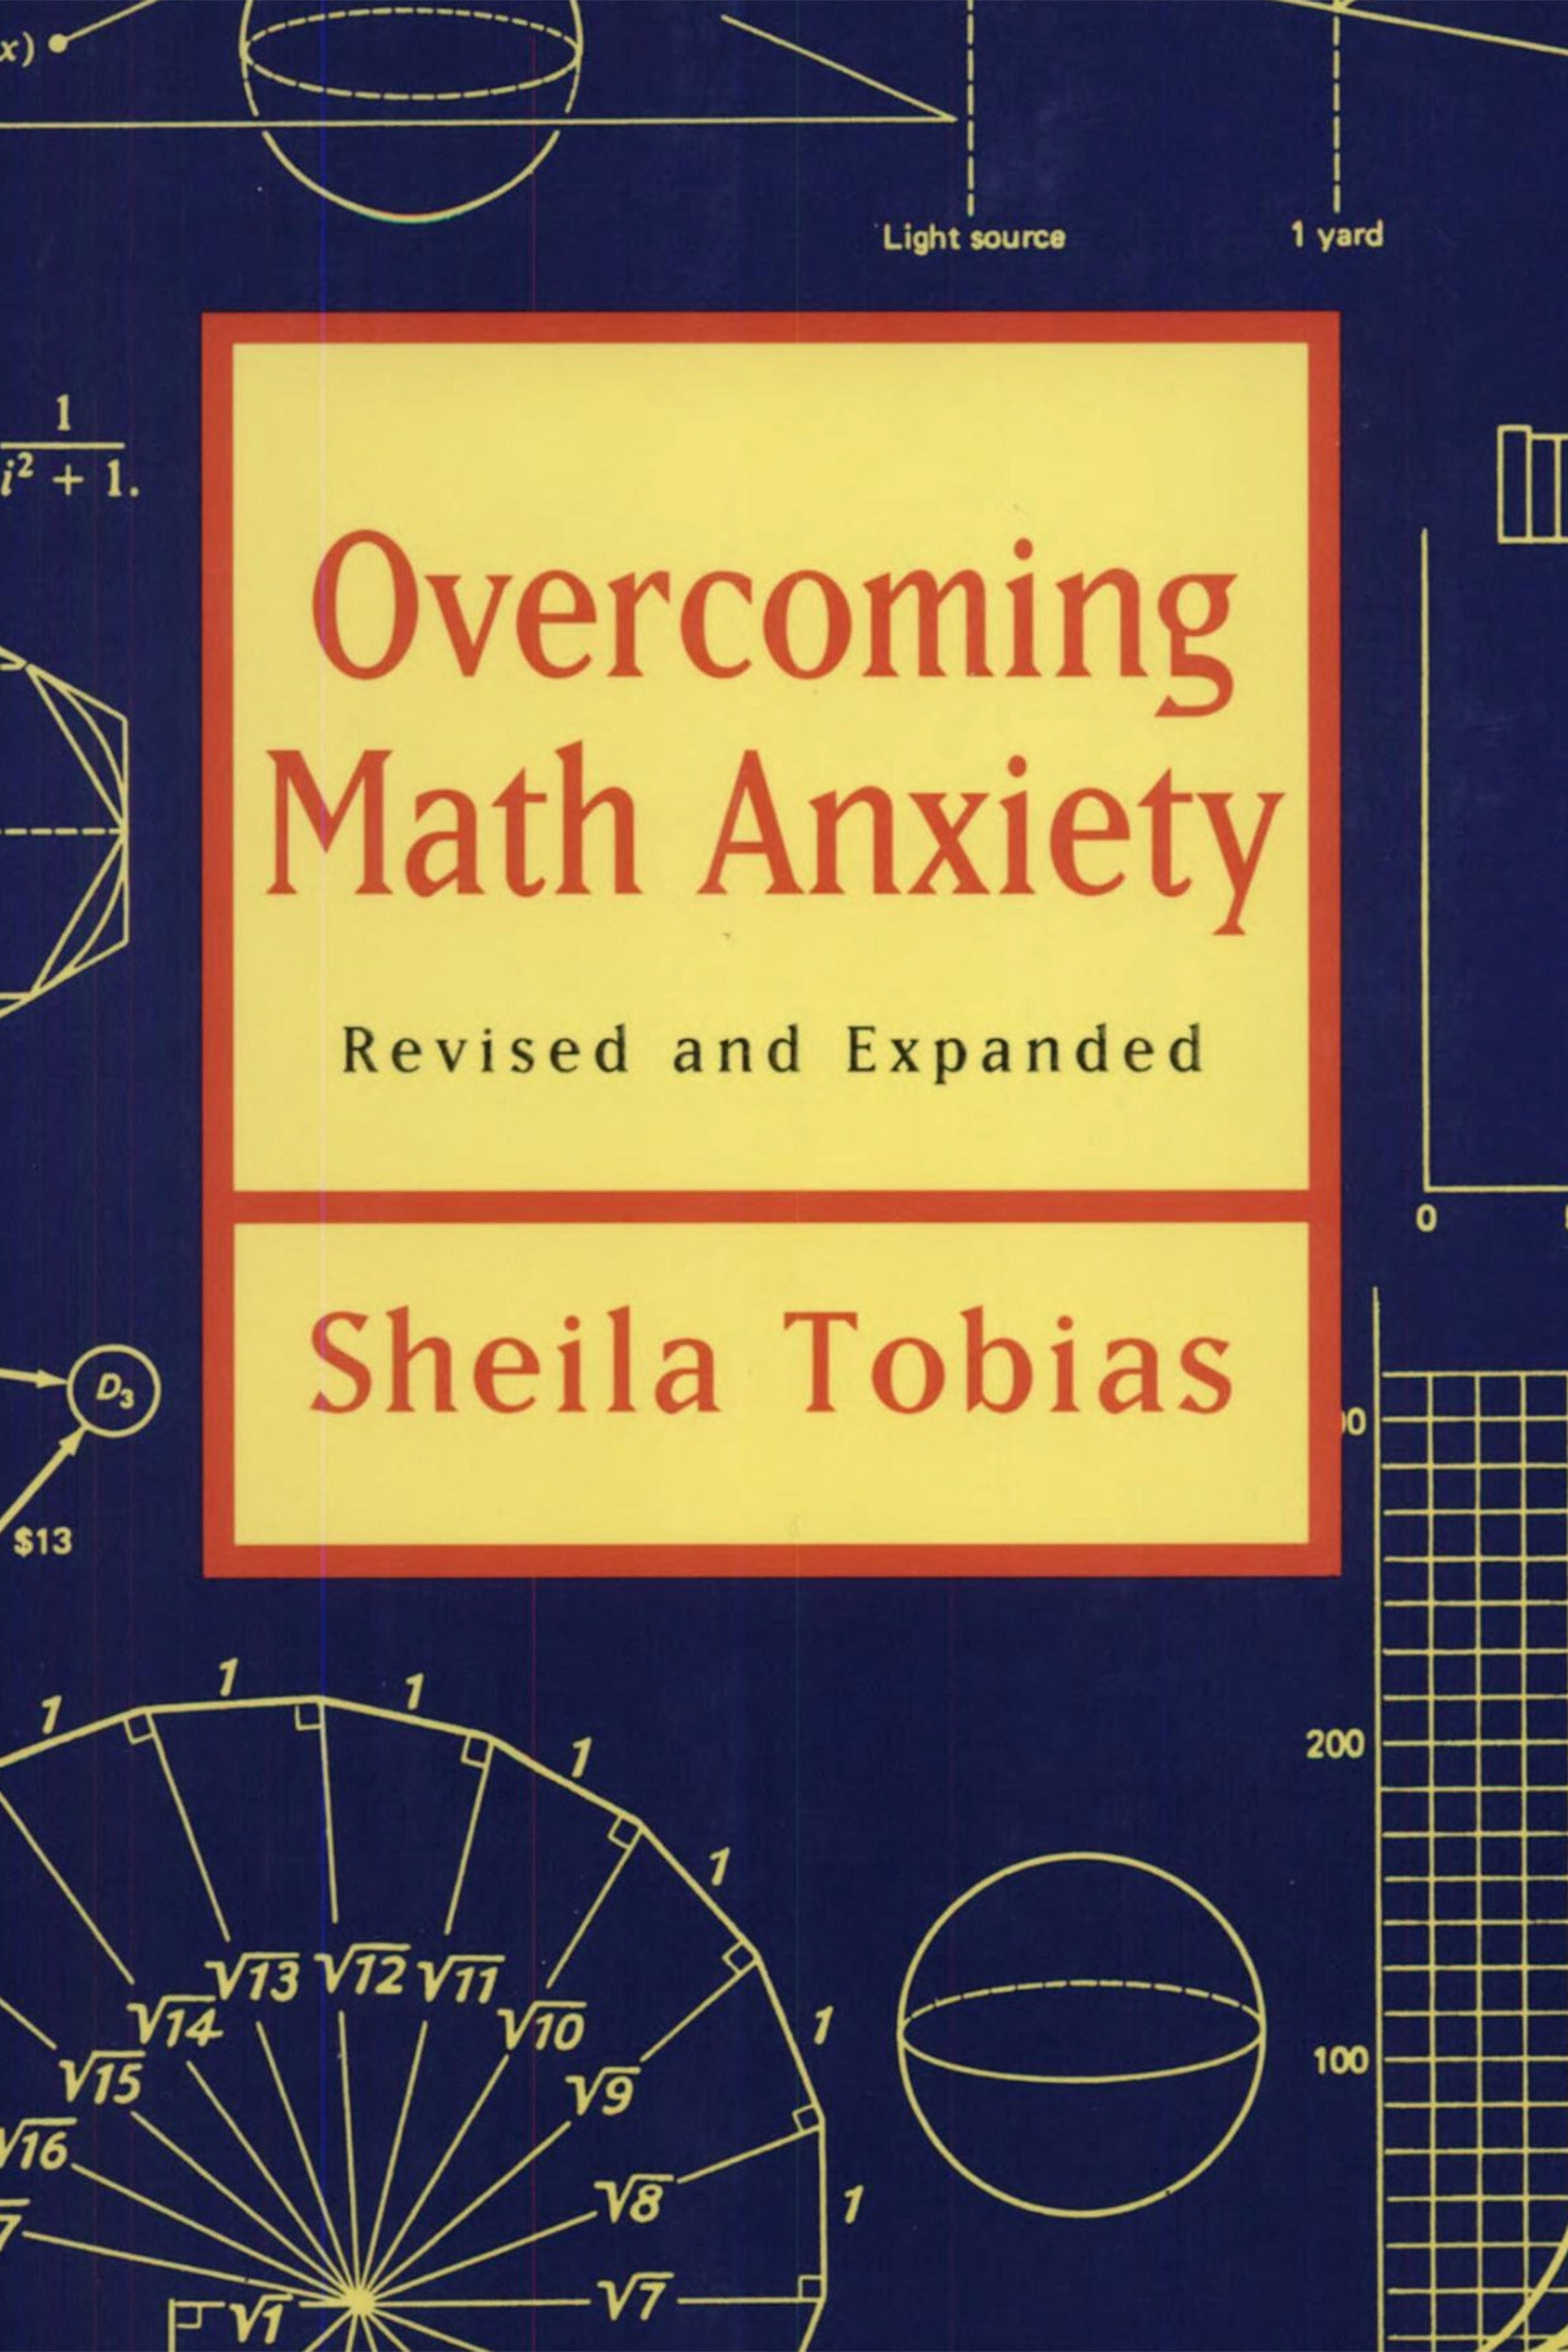 Overcoming math anxiety book cover.